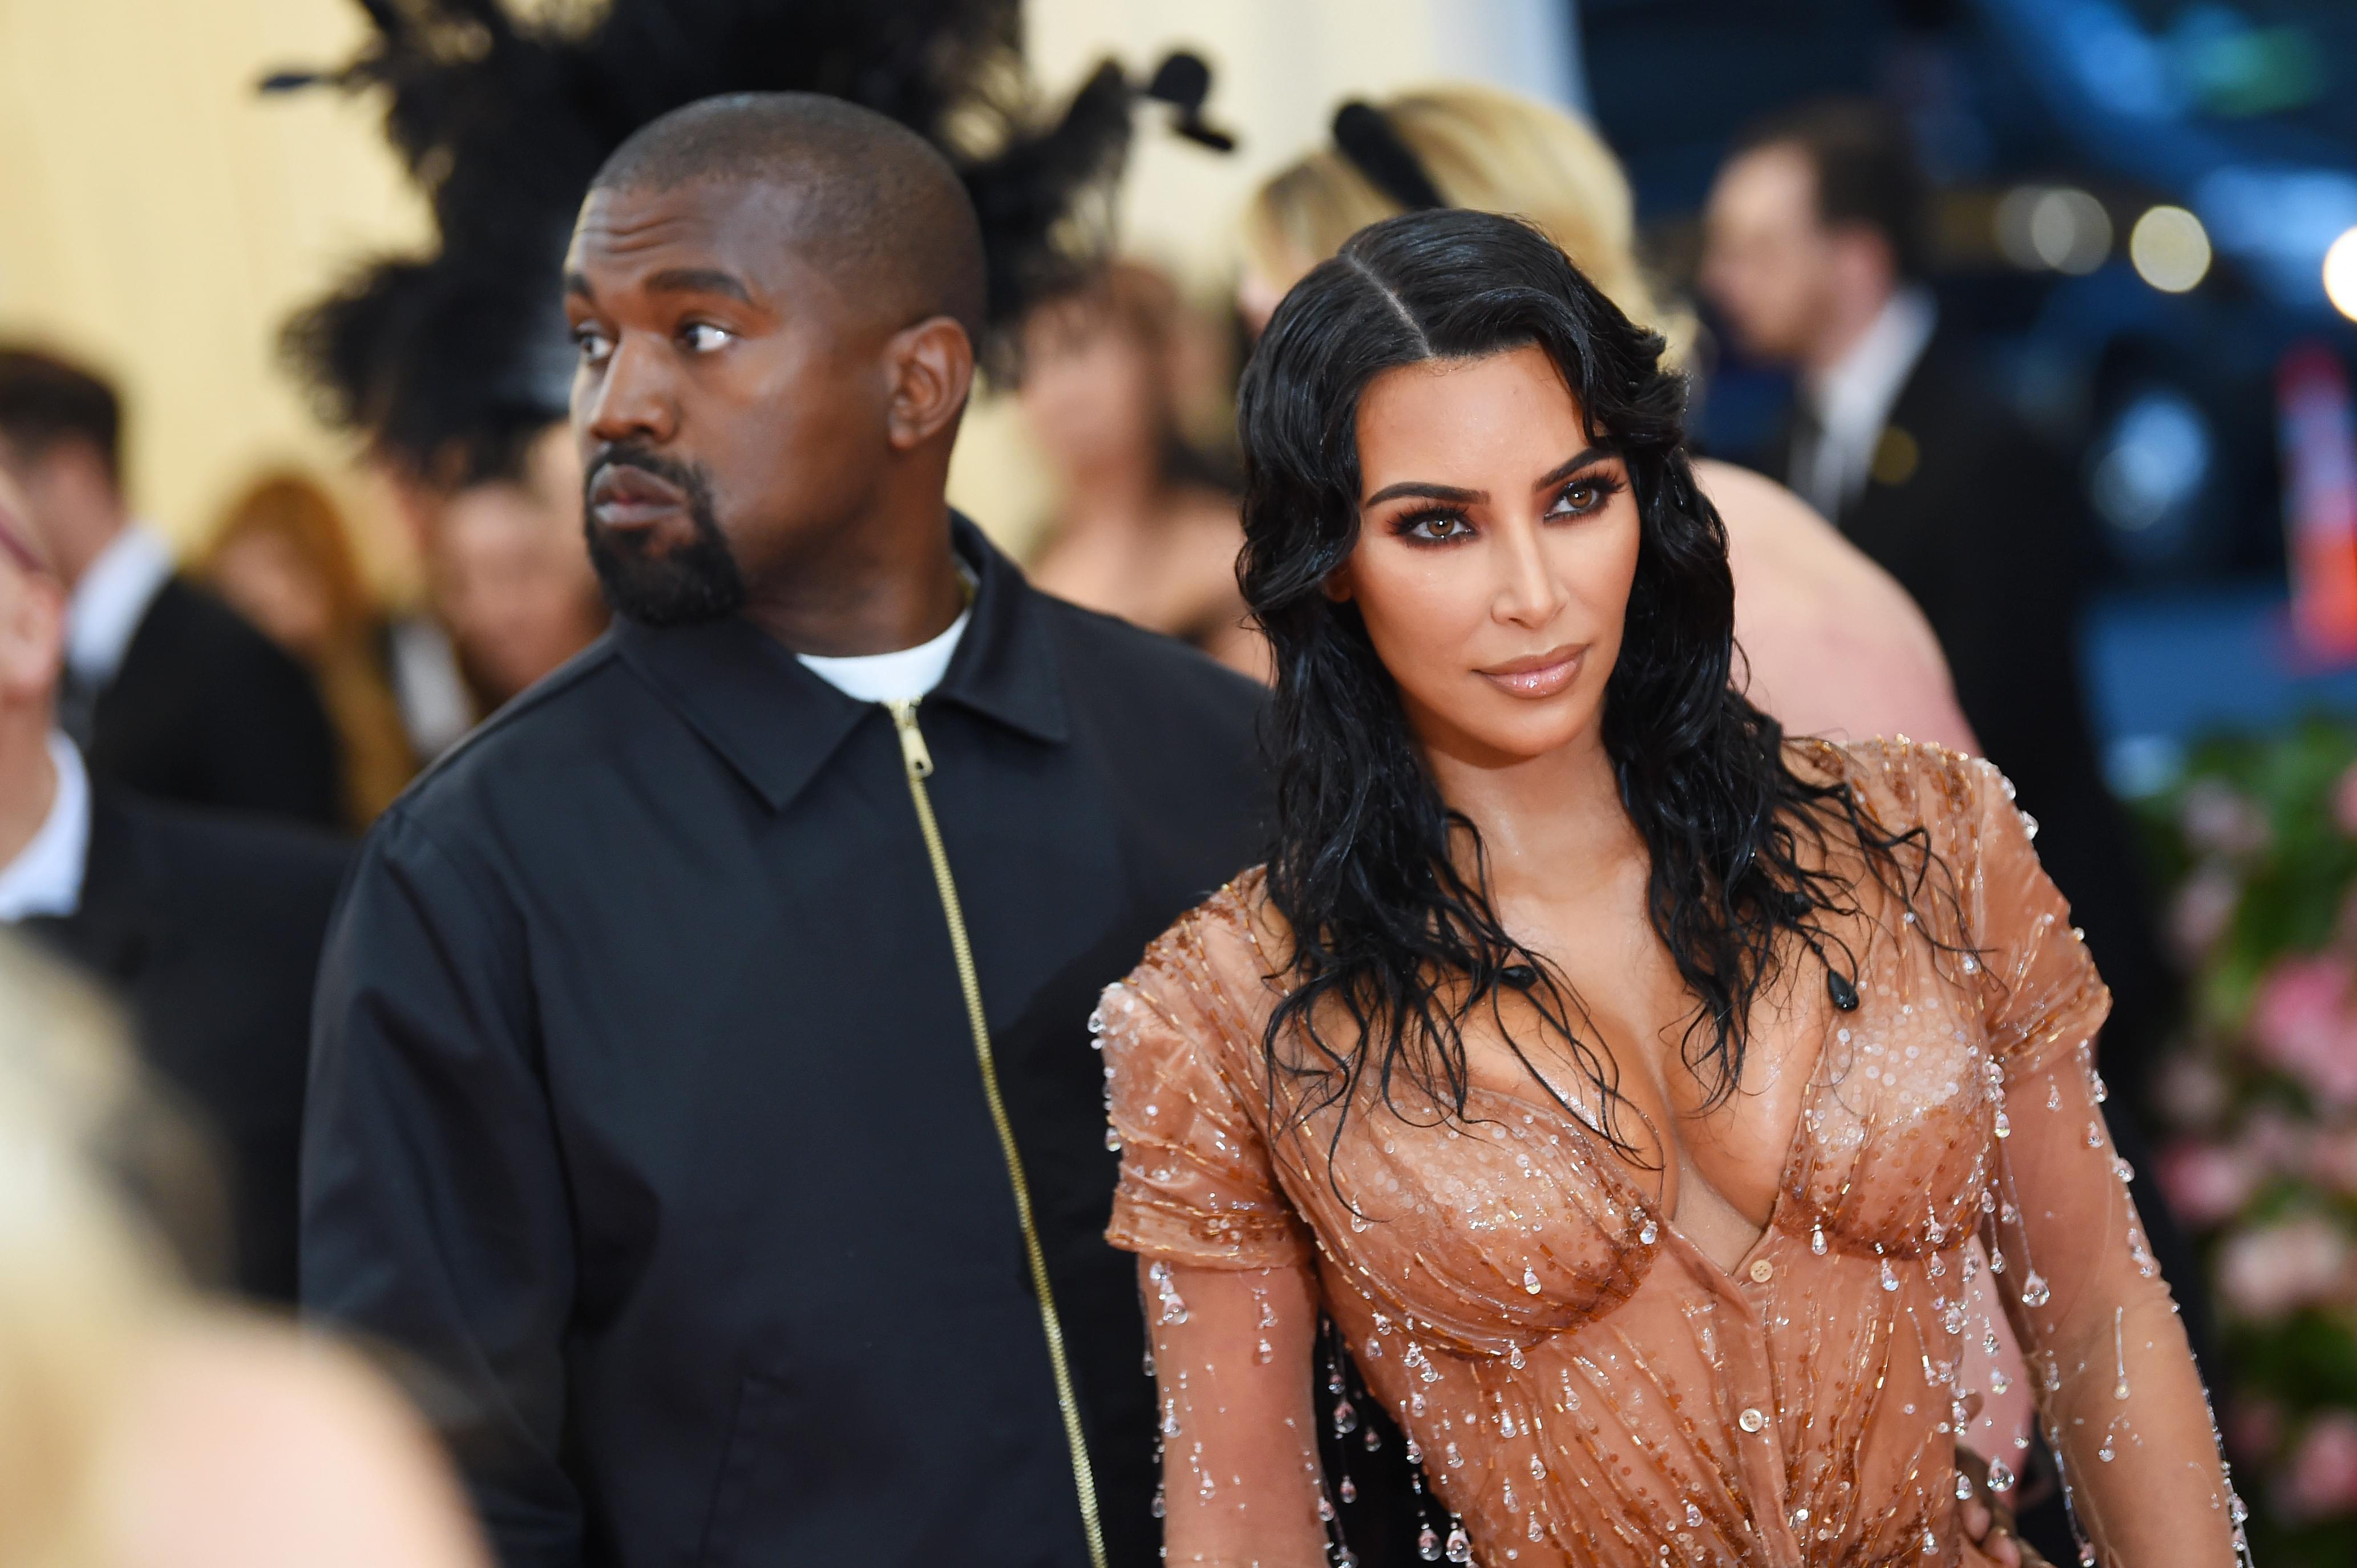 Kim & Kanye Receive Warning For “Animal Harassment” From Wyoming Wildlife Officials